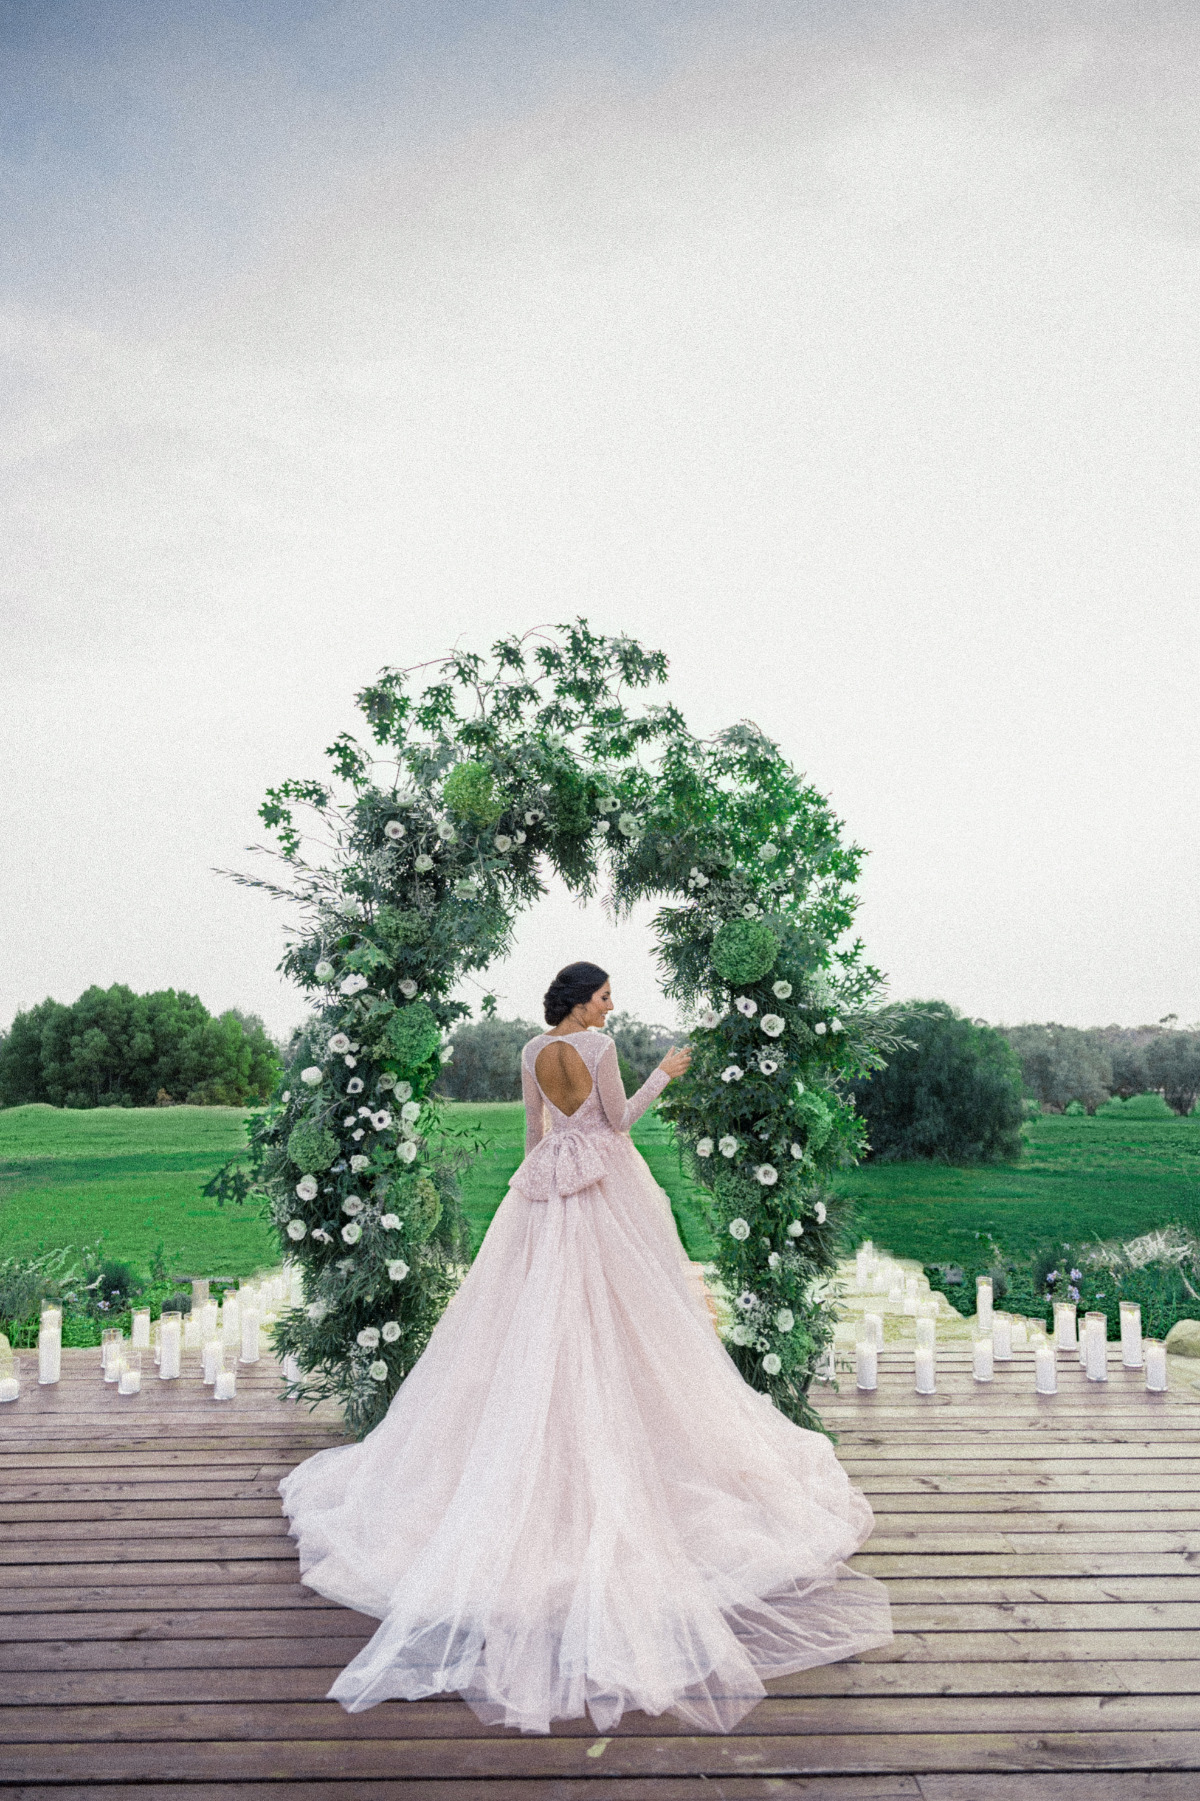 5 Focal Points in your Wedding Design